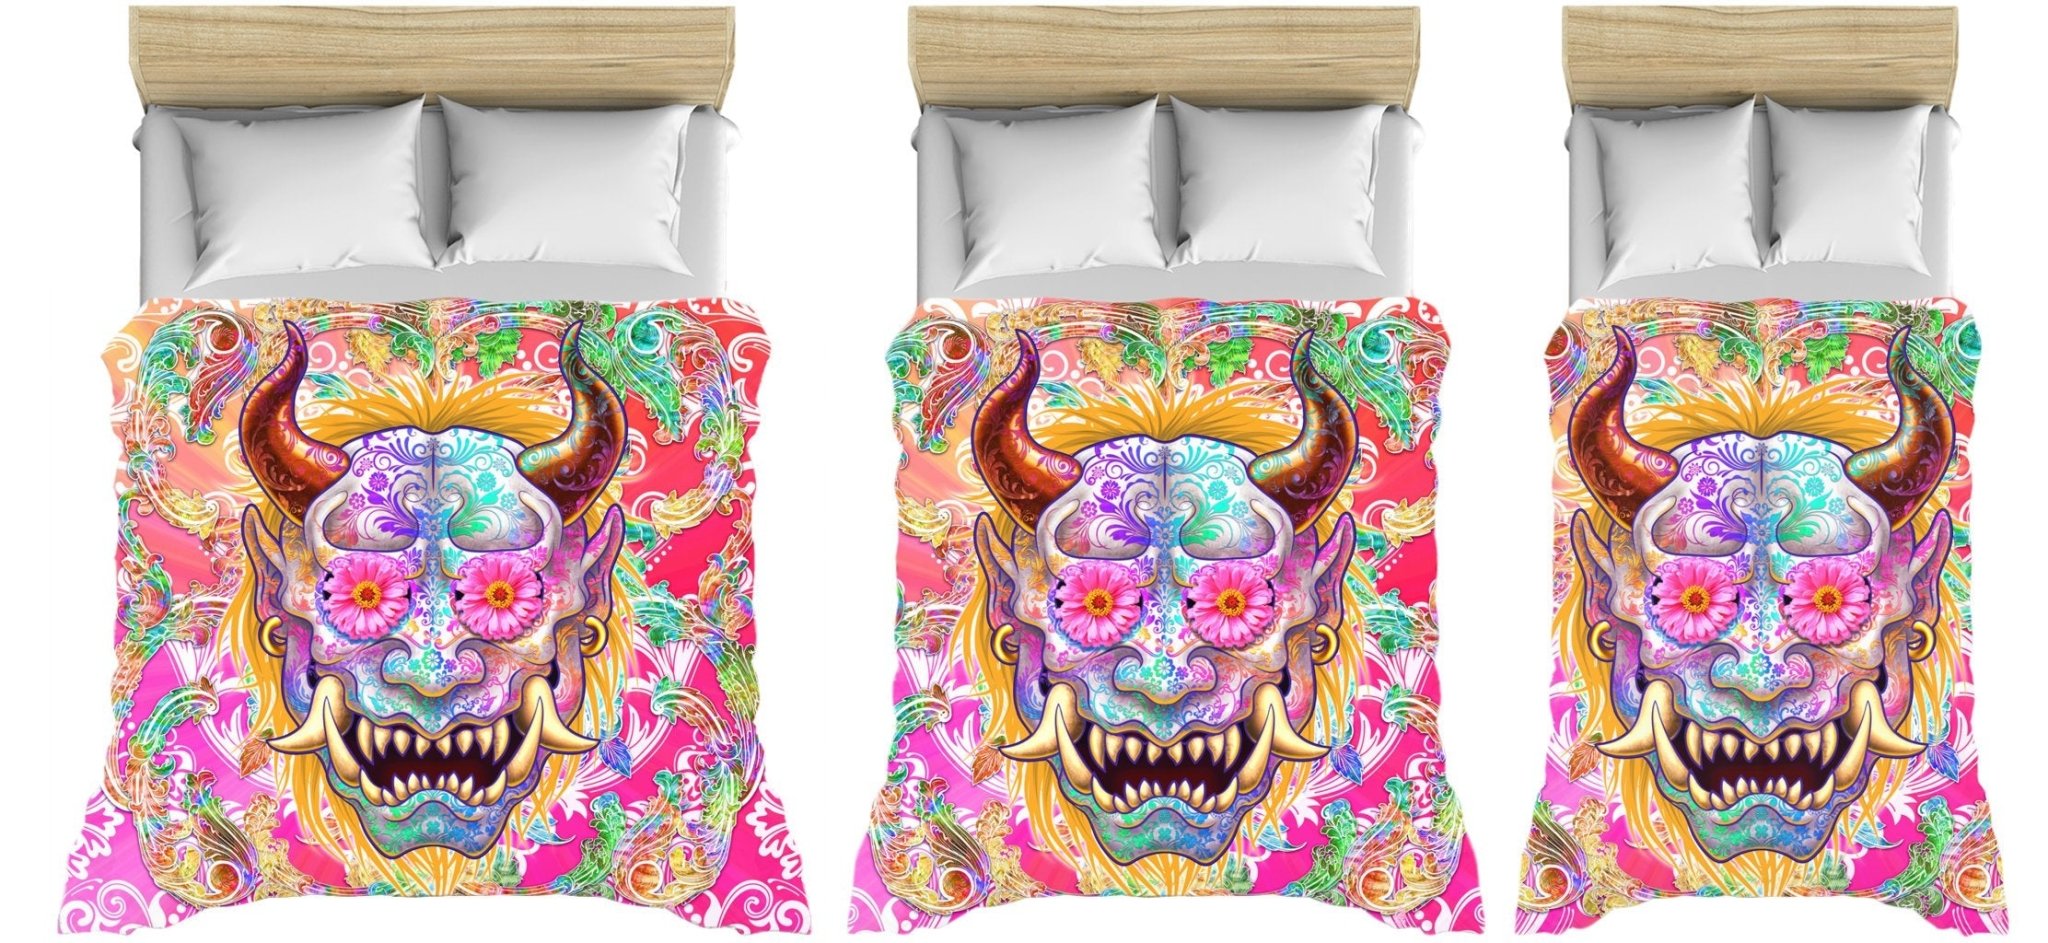 Psychedelic Bedding Set, Comforter and Duvet, Indie Indie Bed Cover and Bedroom Decor, King, Queen and Twin Size - Psy Oni, Japanese Demon - Abysm Internal